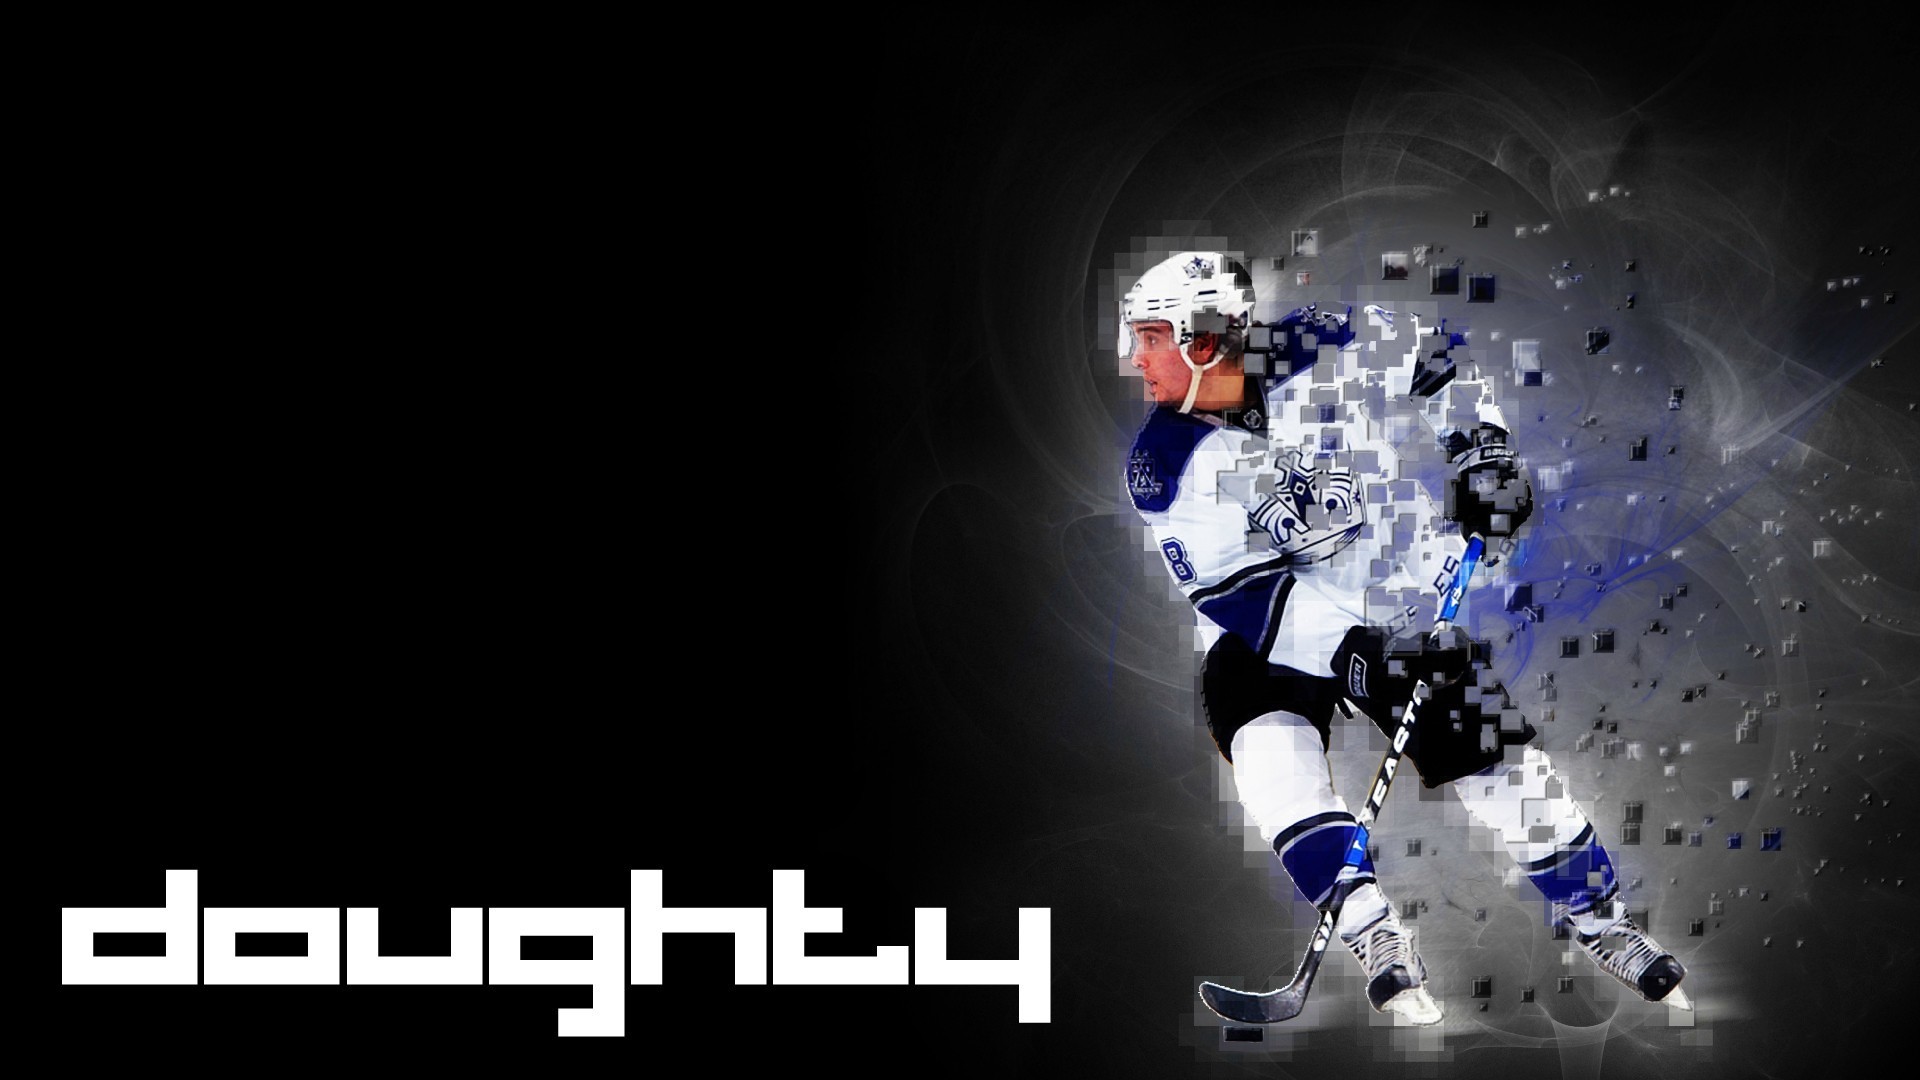 1920x1080 Hockey player of los angeles Drew Doughty wallpapers and images  -  HD Wallpapers